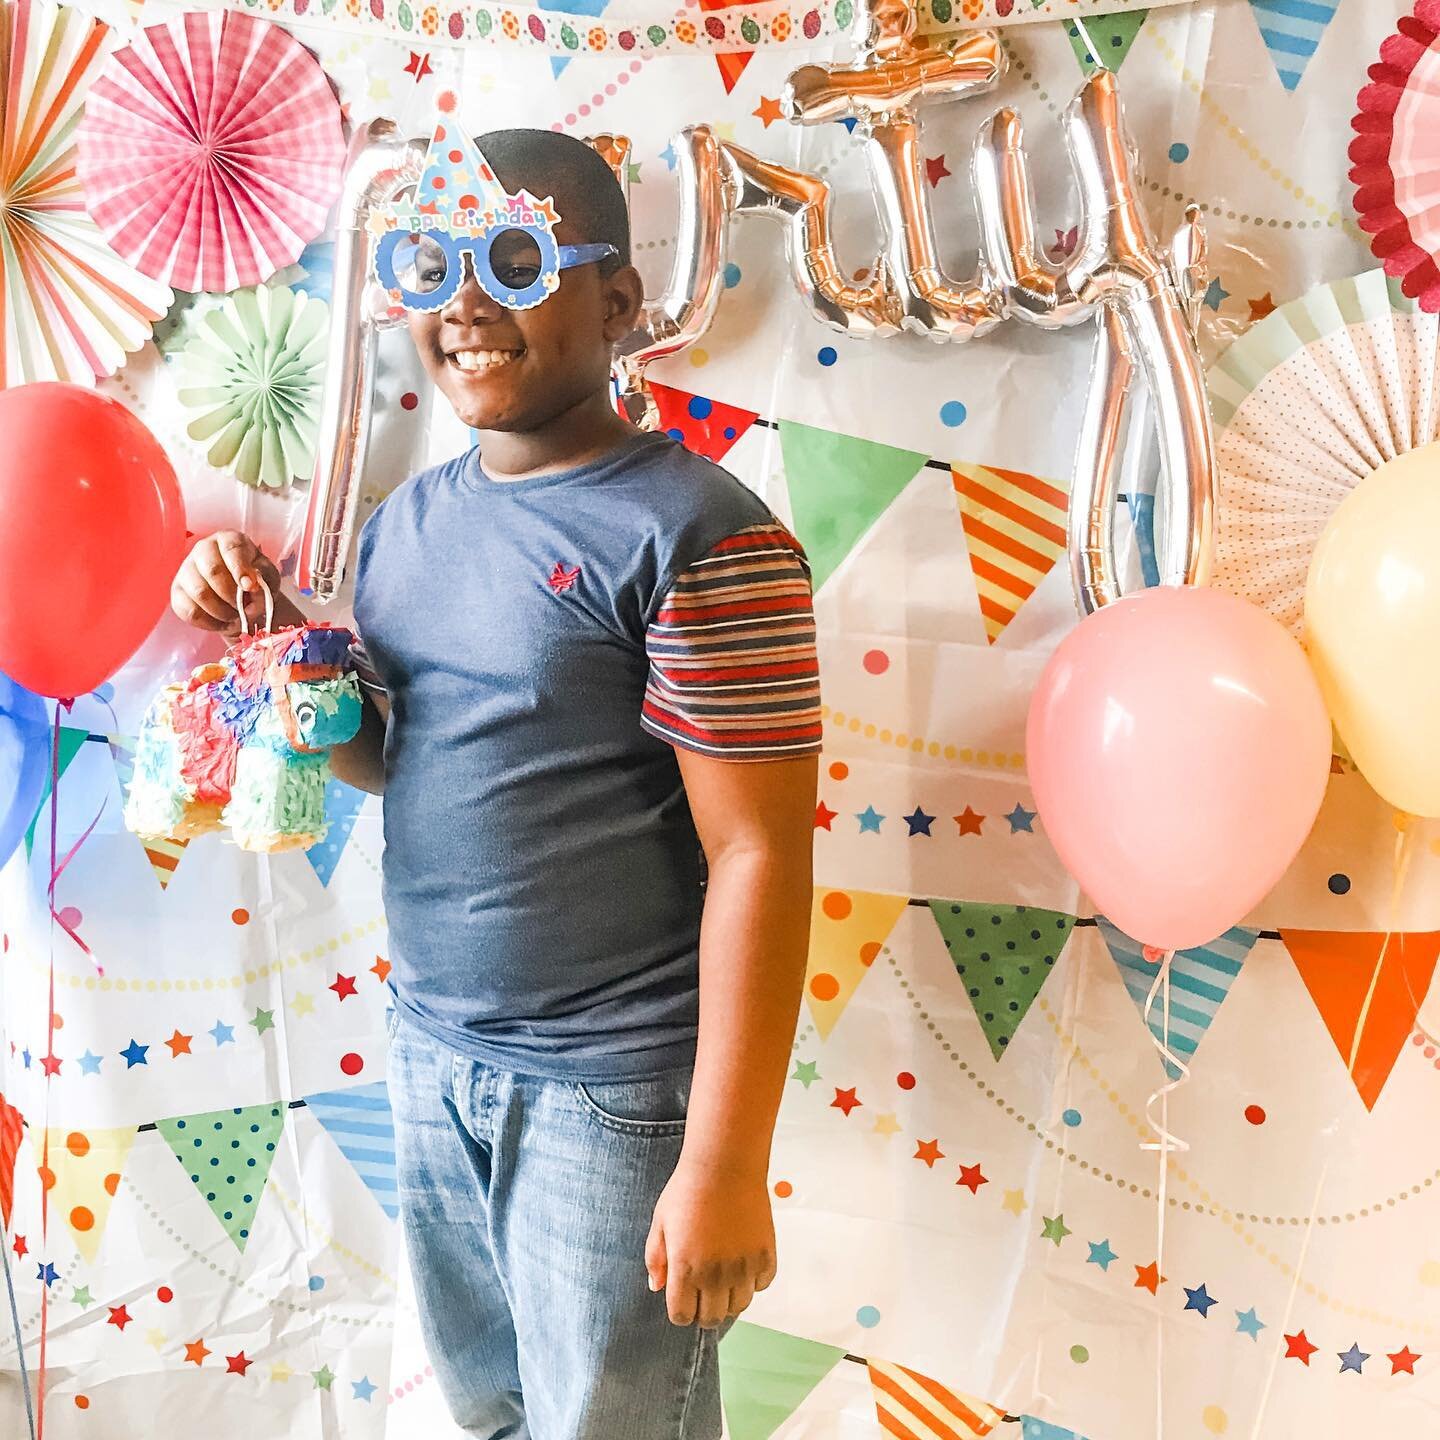 About Celebrate RVA & Giving Birthday Party Joy — Donate Birthday's to ...